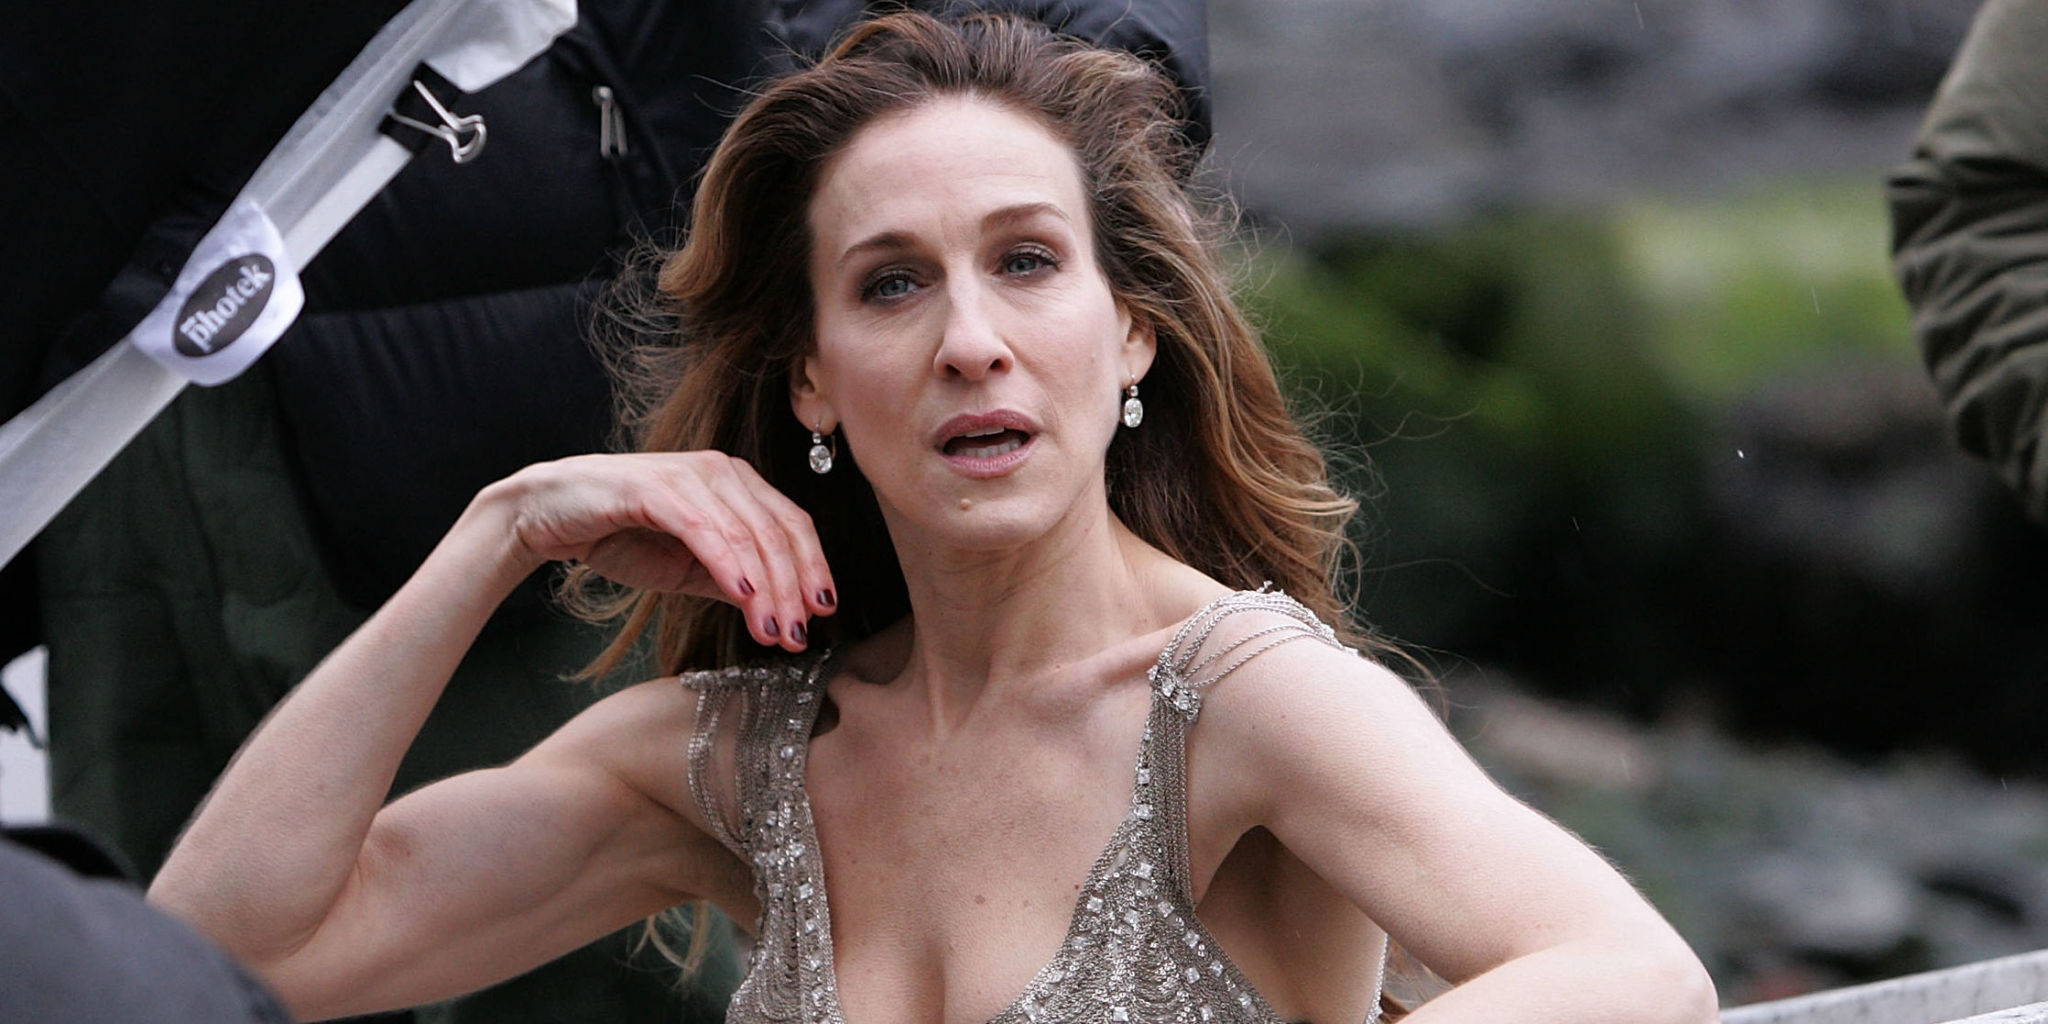 darlene skaalrud townsend recommends sarah jessica parker nudography pic